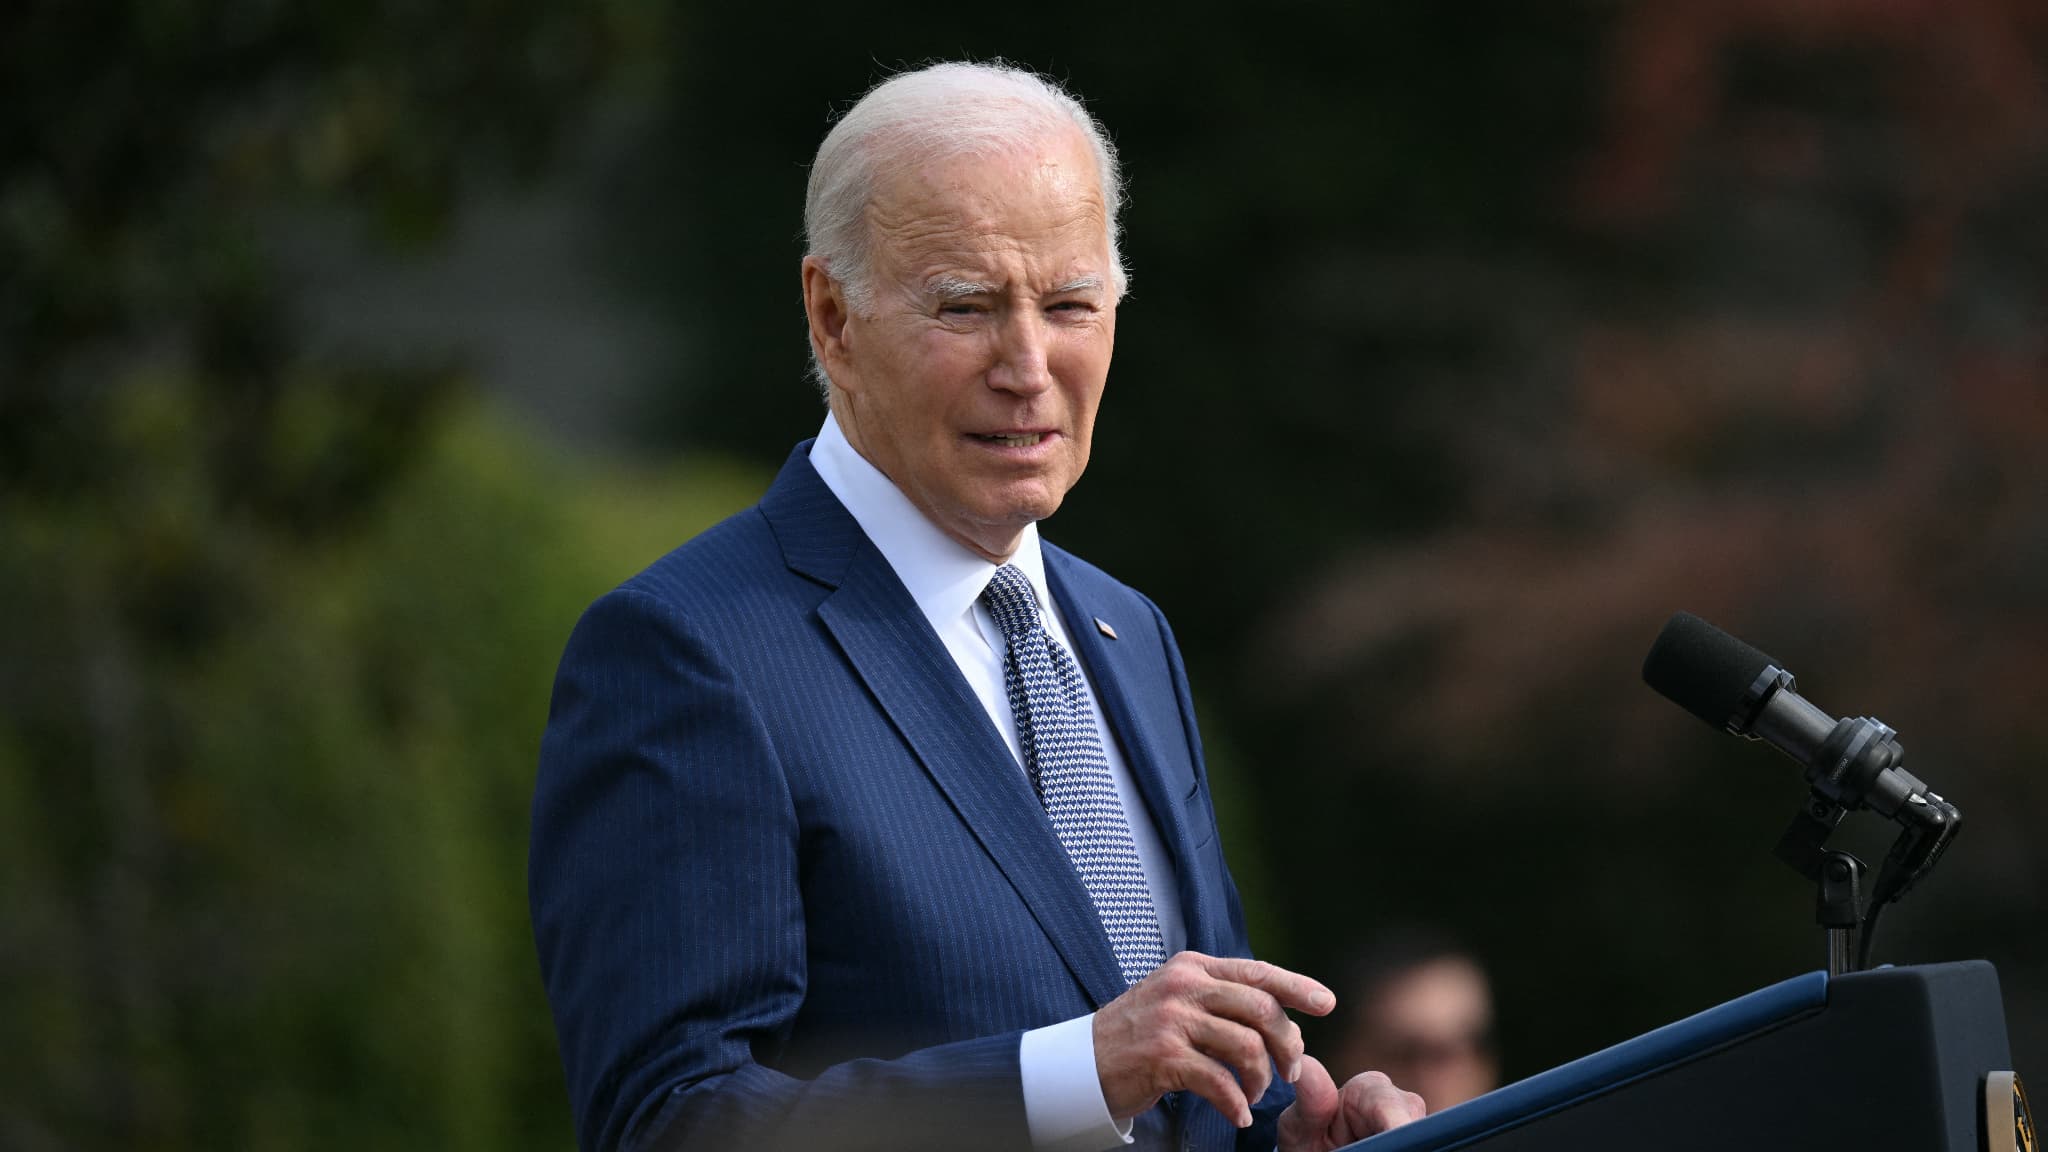 Joe Biden is the target of an impeachment inquiry opened by Congress